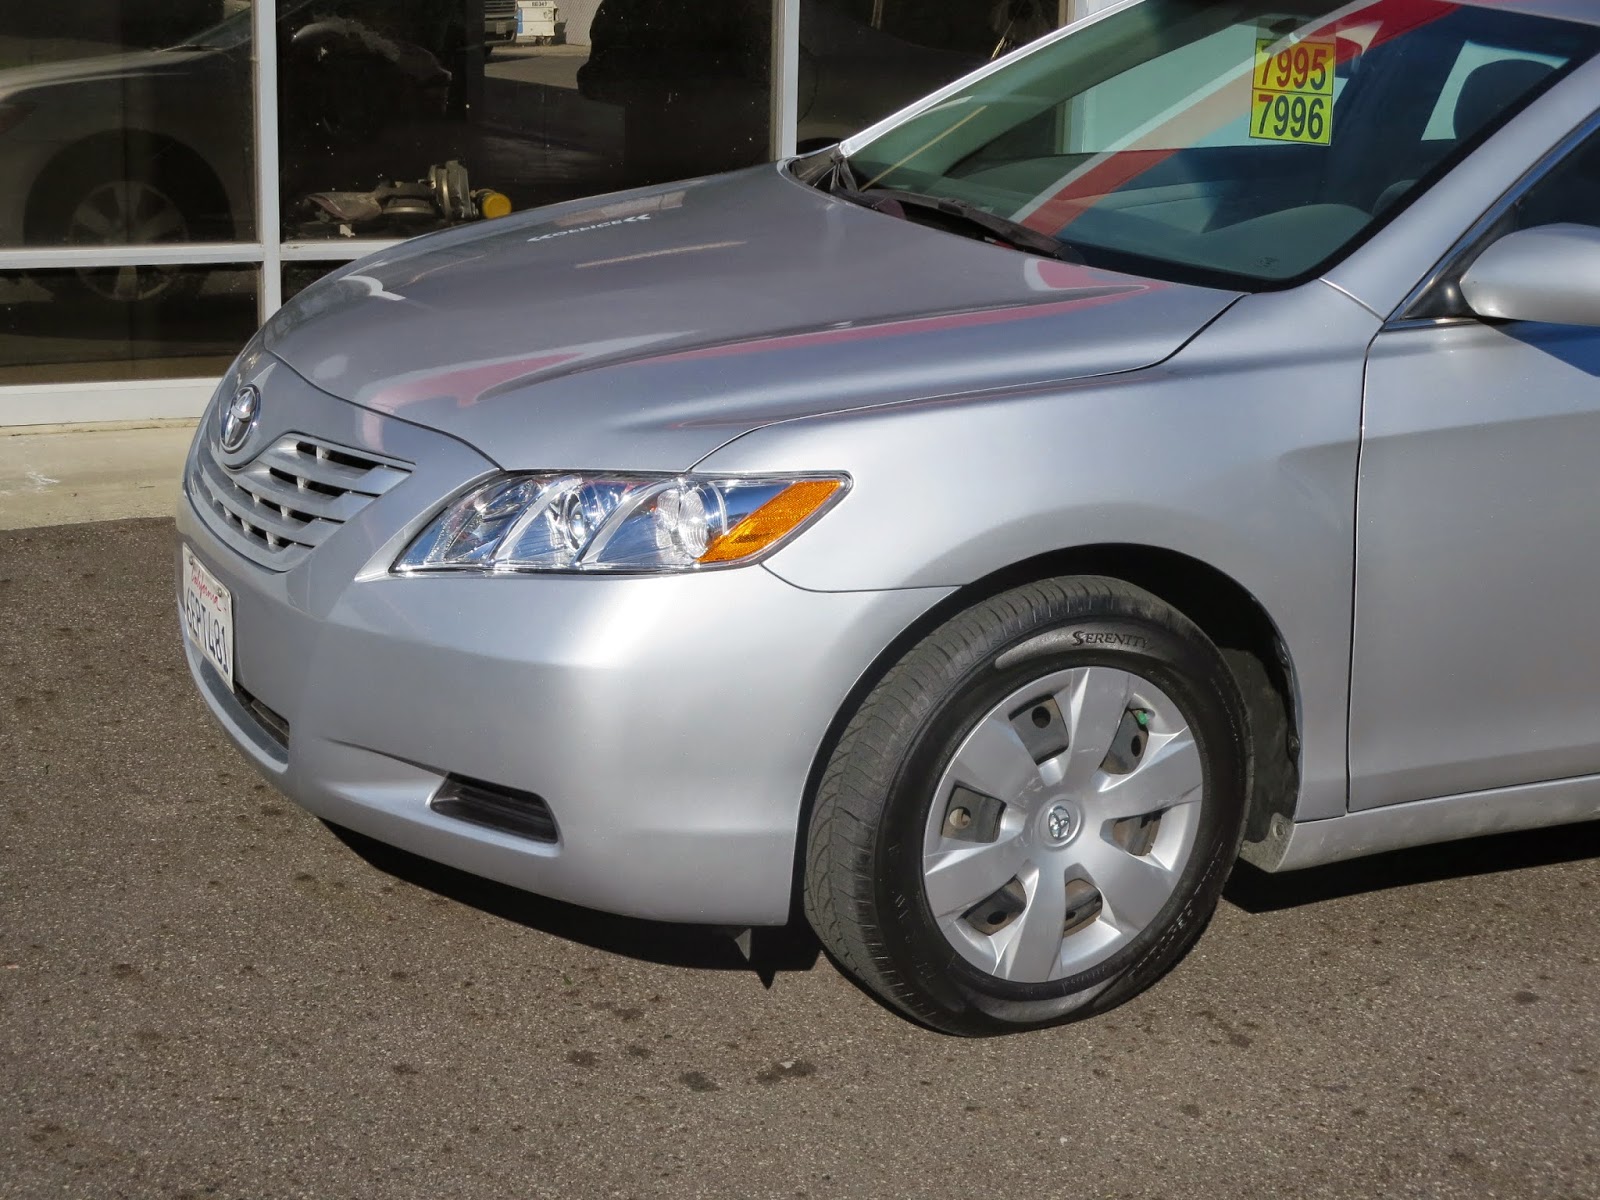 2009 Toyota Camry after collsion repair at Almost Everything Auto Body